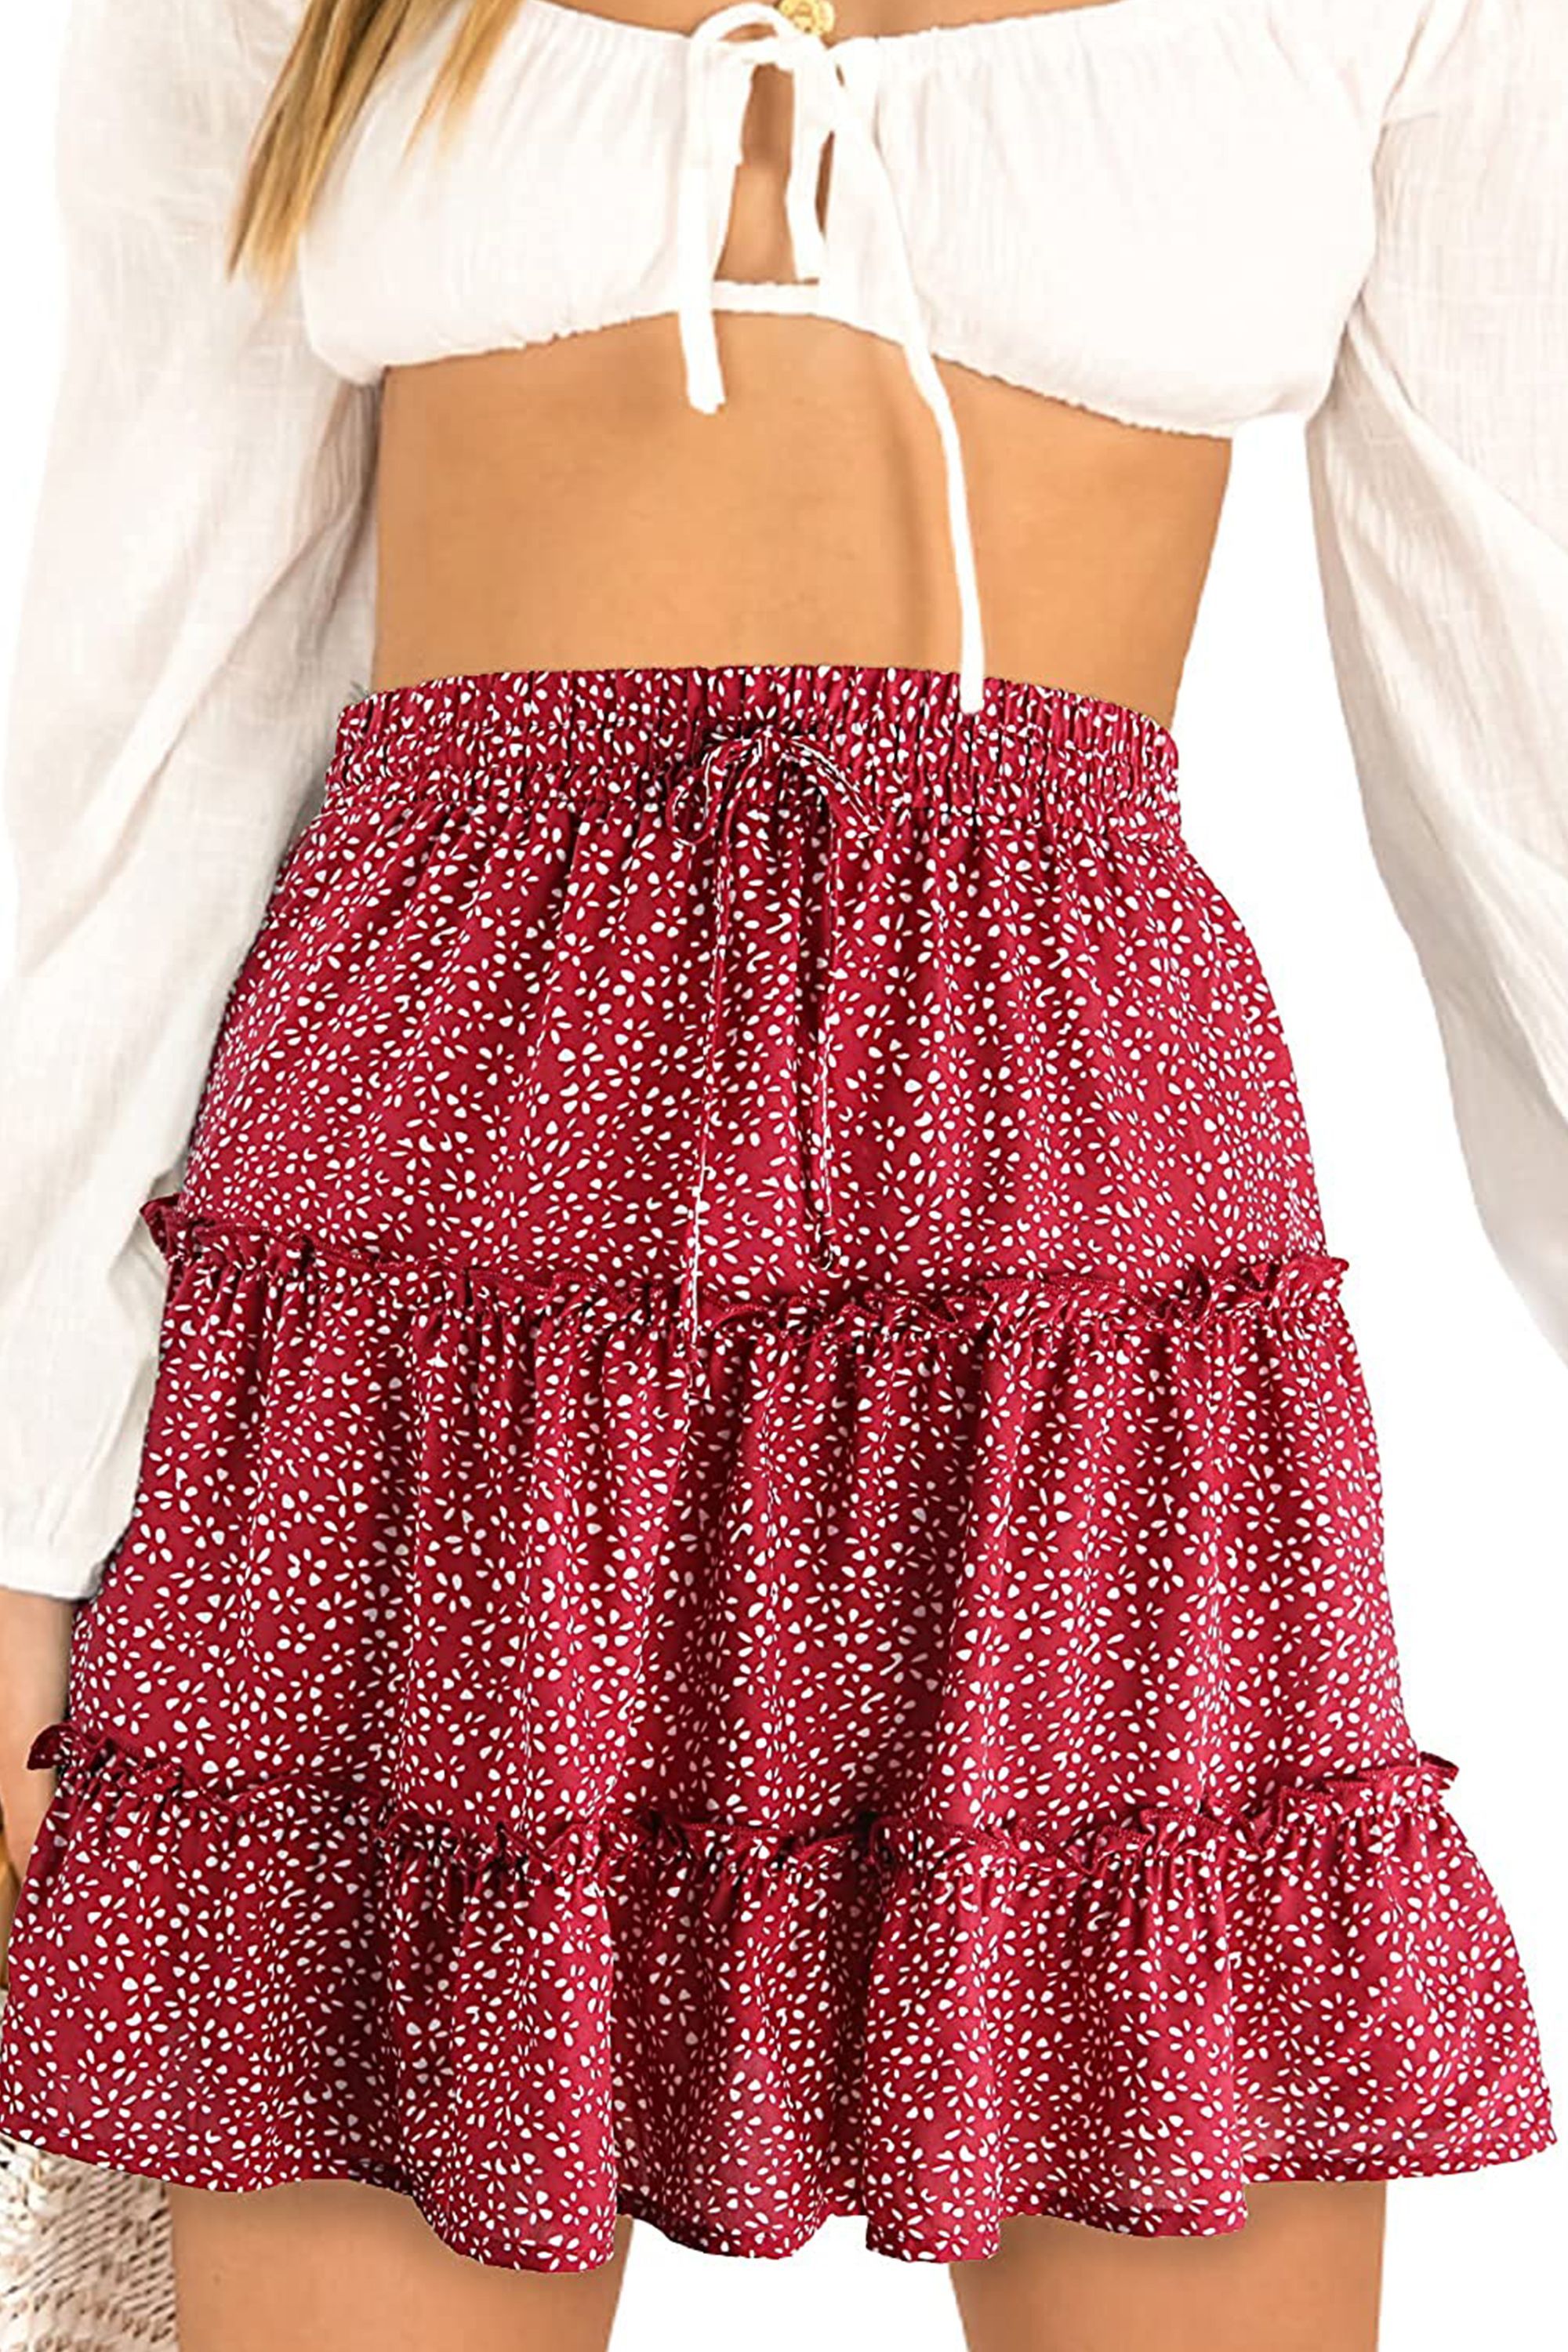 25 Summer Skirts That Are Worth Shaving Your Legs For